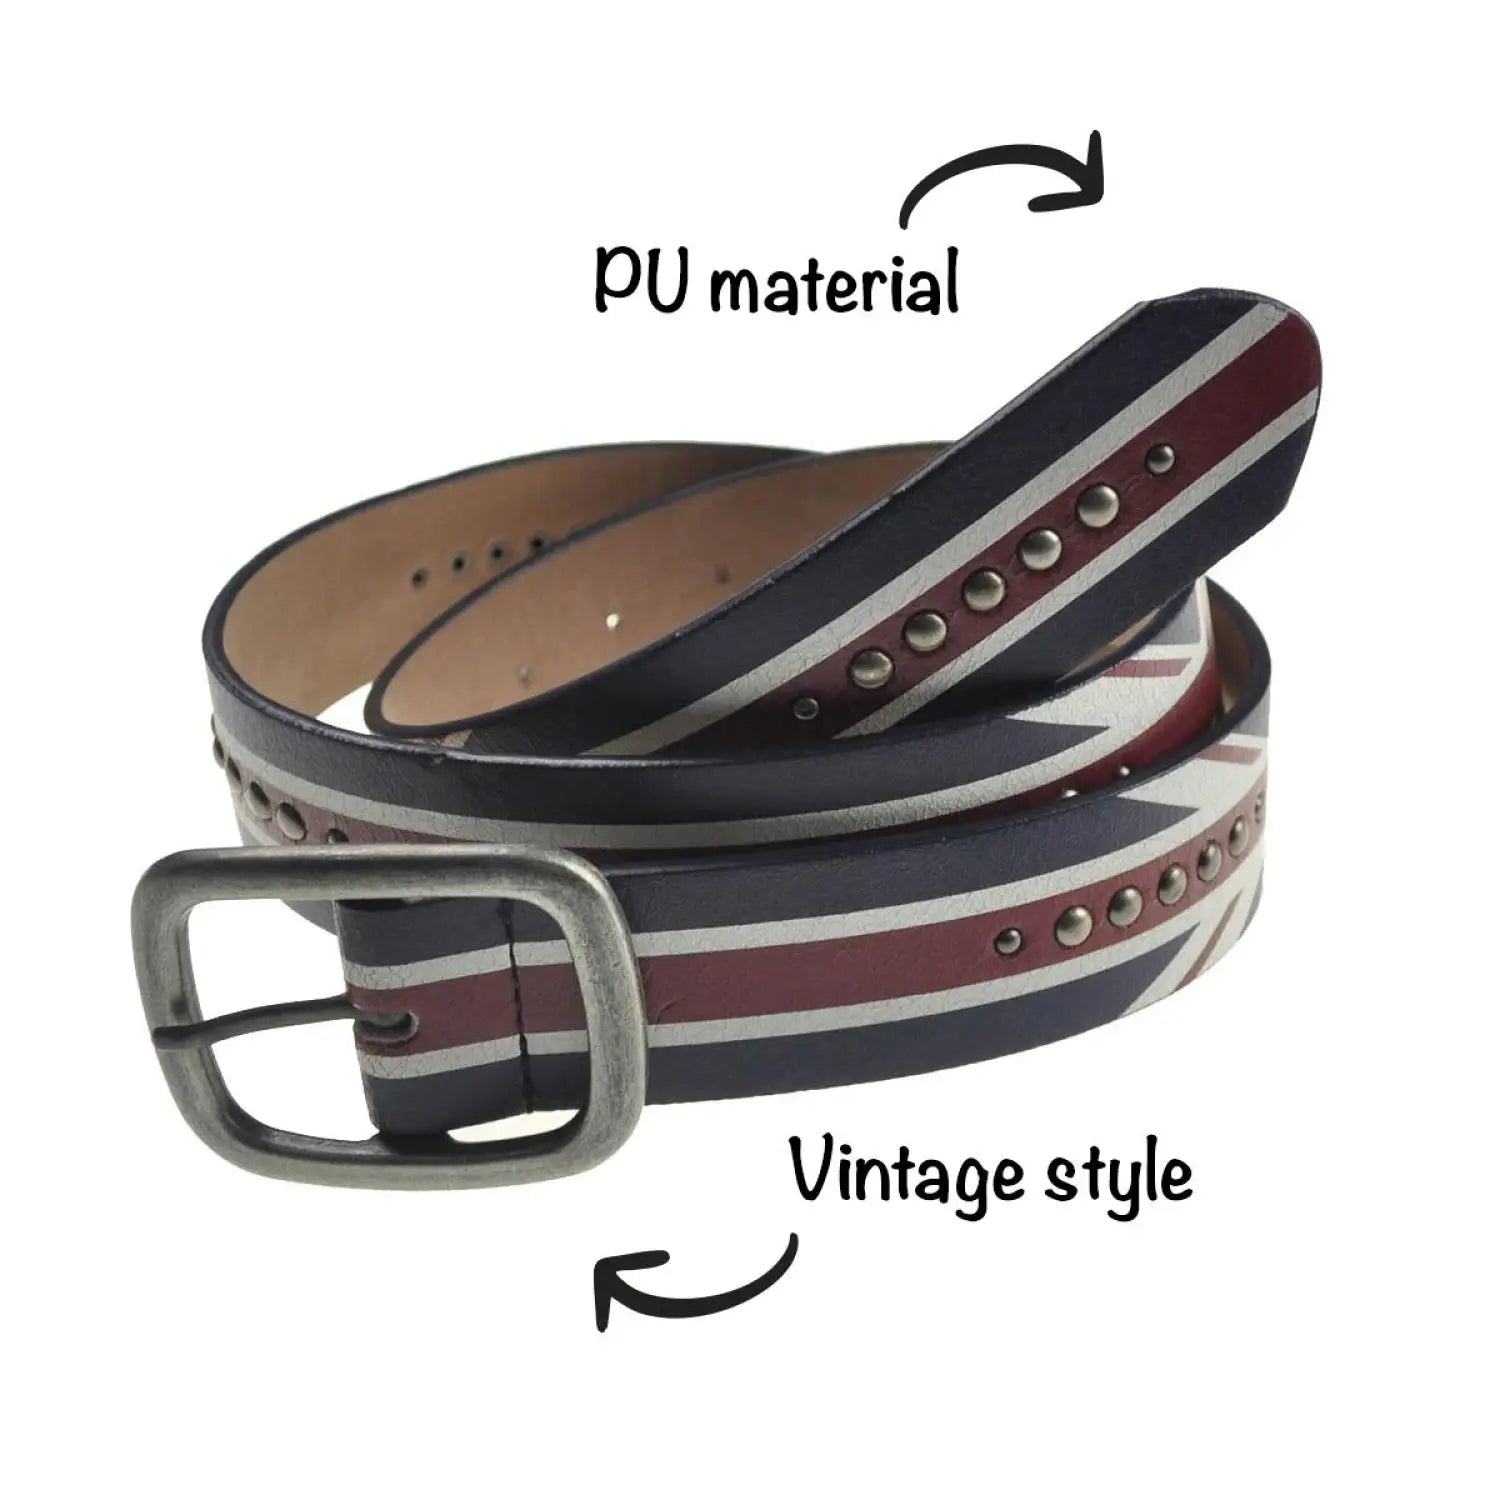 Union Jack Antique-Effect PU Leather Jean Belts in Different Colors and Sizes